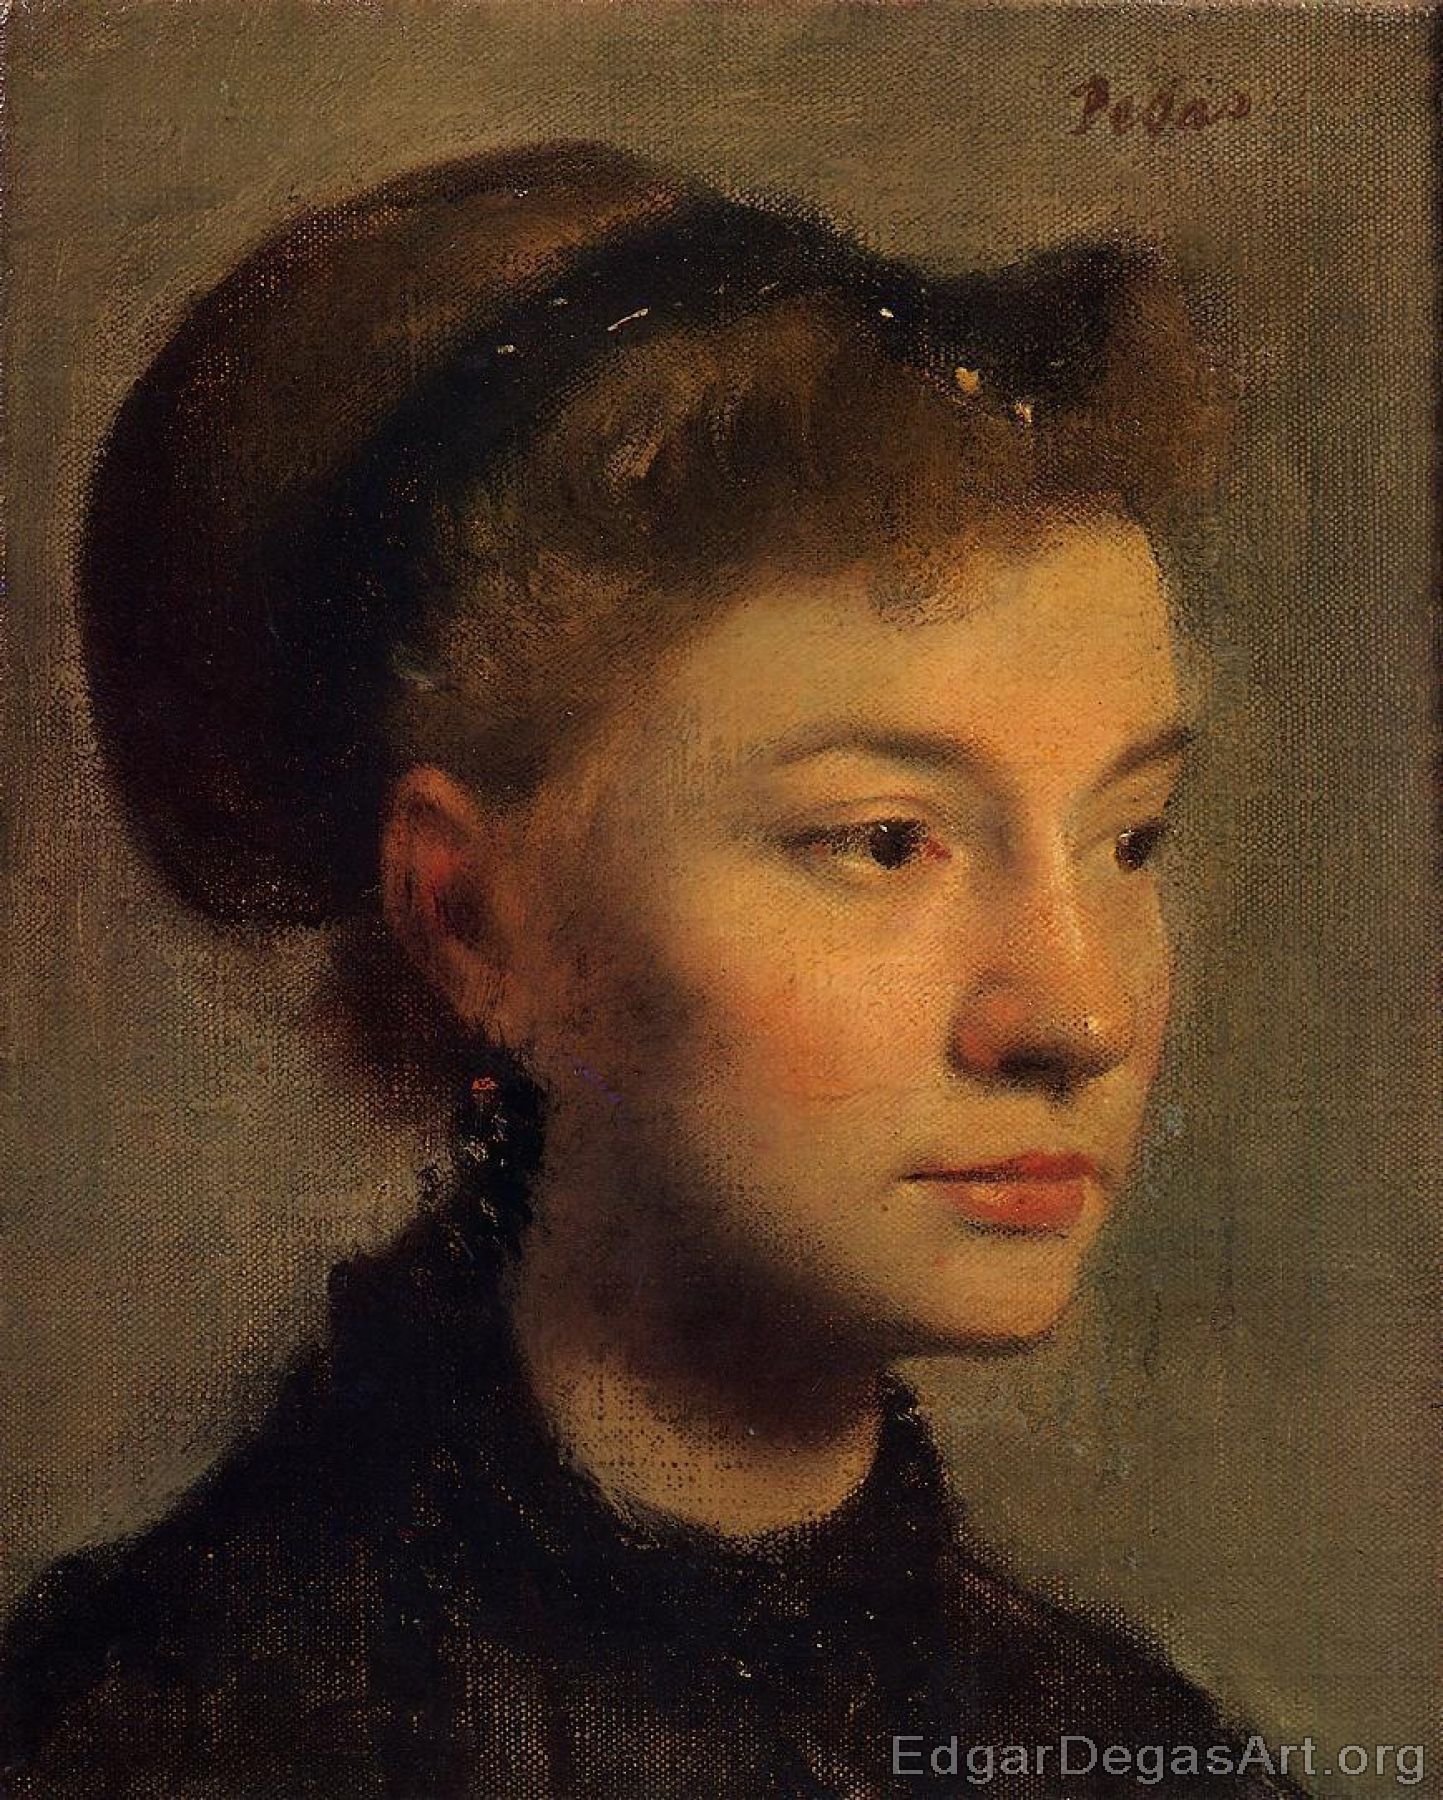 Head of a Young Woman II